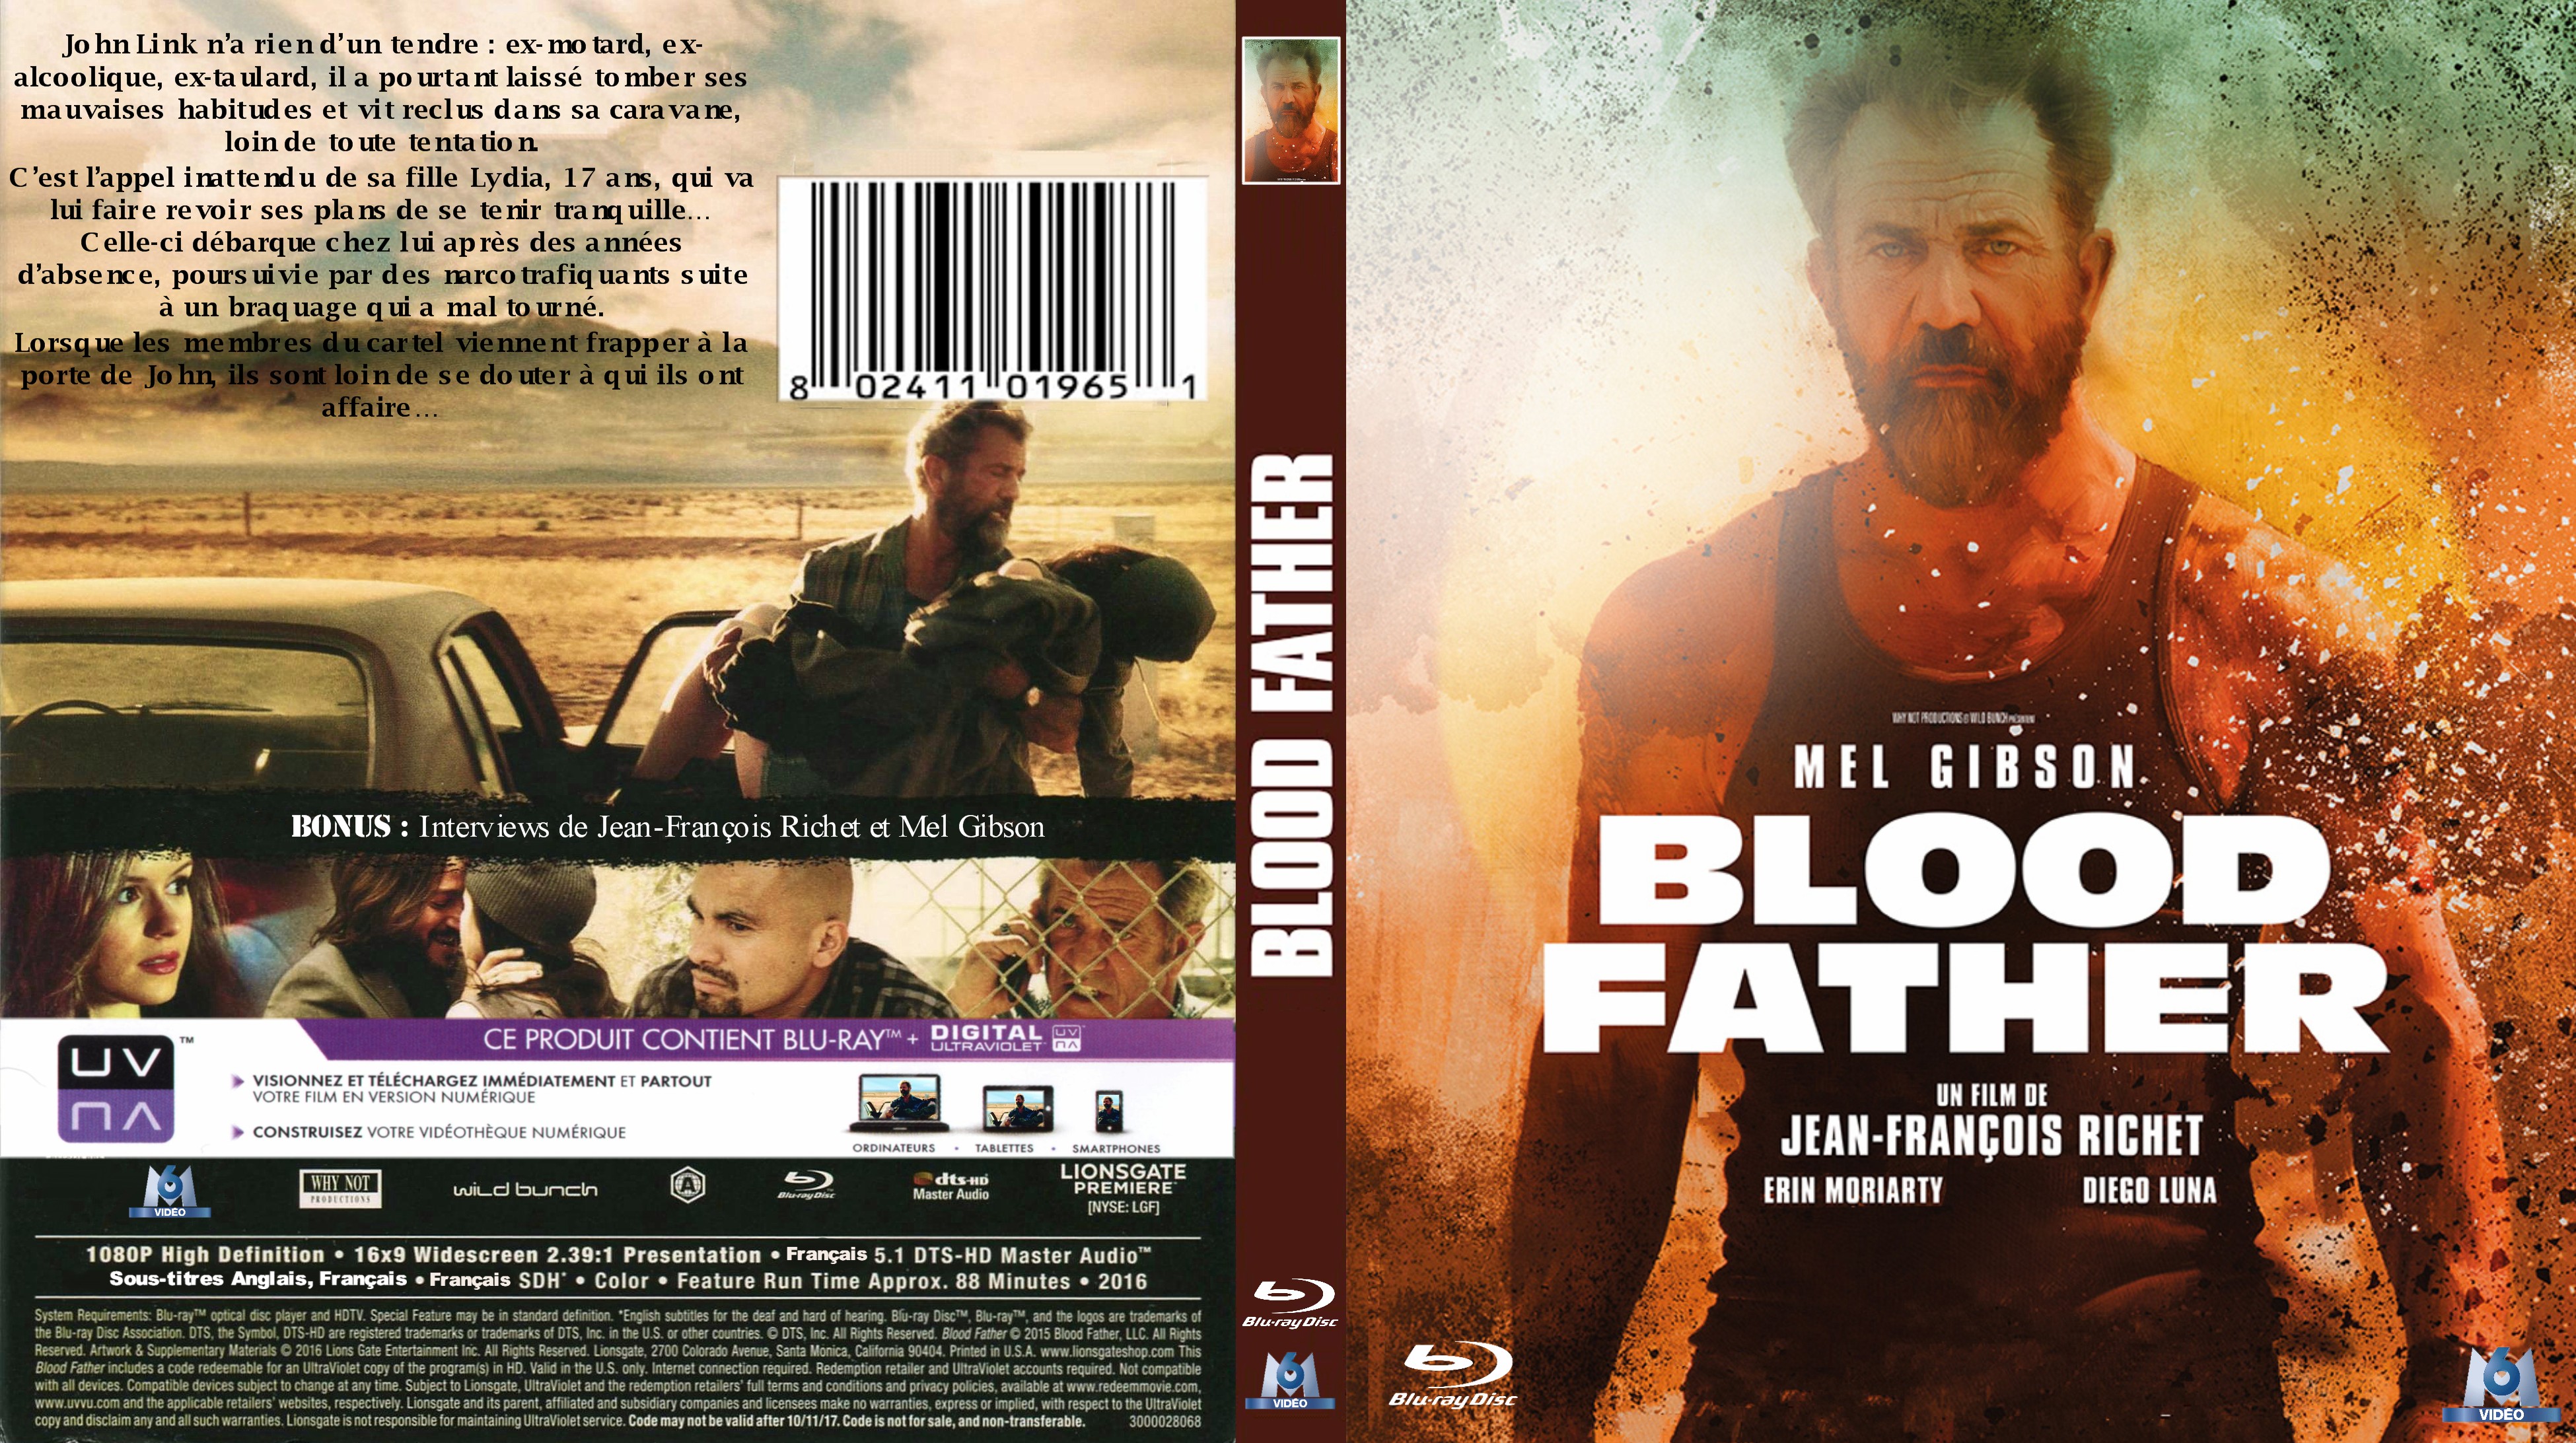 Jaquette DVD Blood Father custom (BLU-RAY)